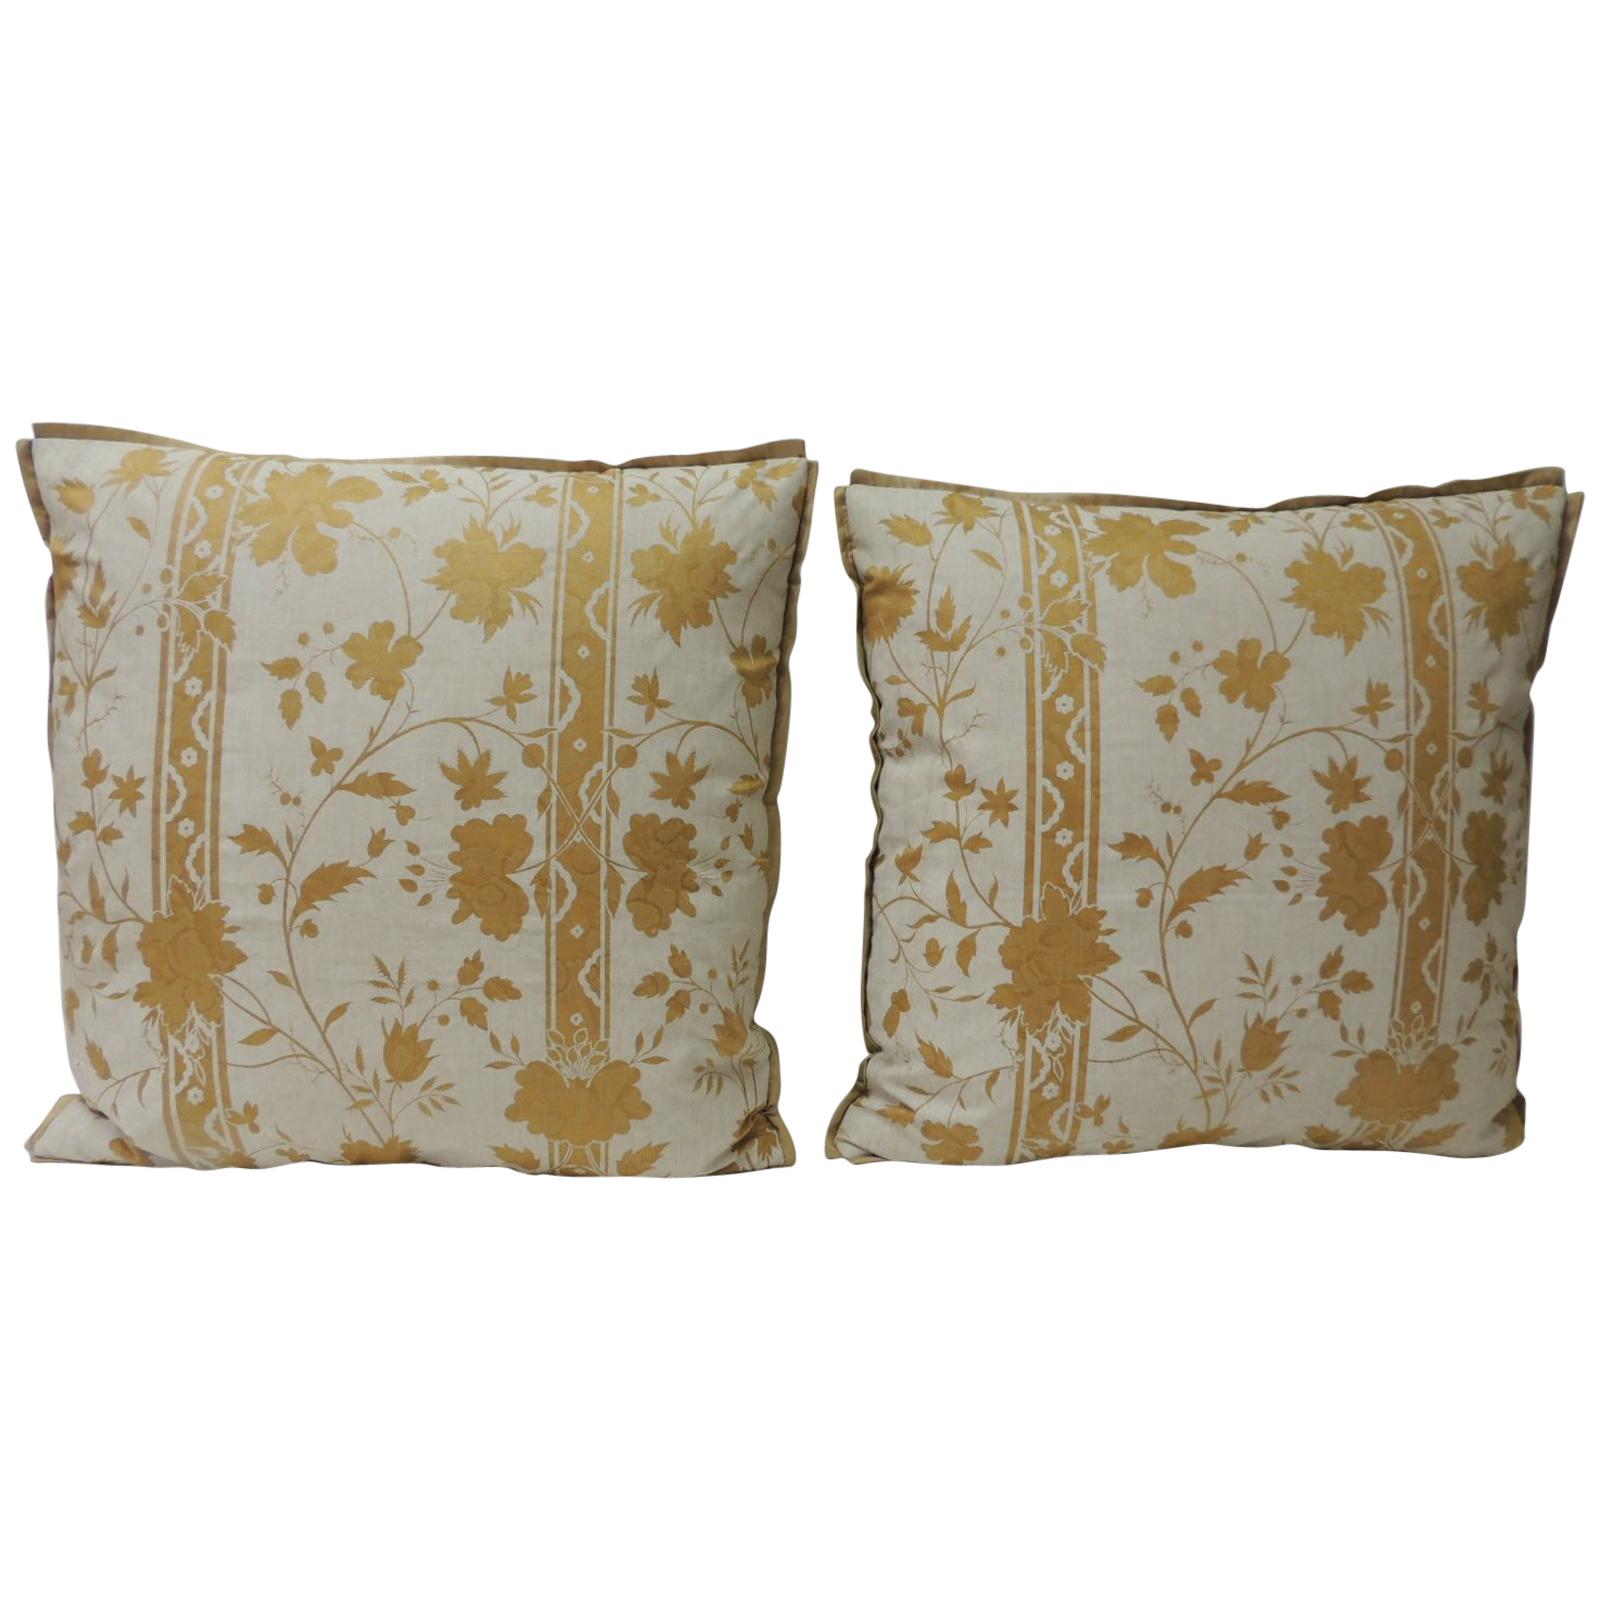 Pair of Vintage Yellow & Natural Fortuny Stripes and Flowers Decorative Pillows